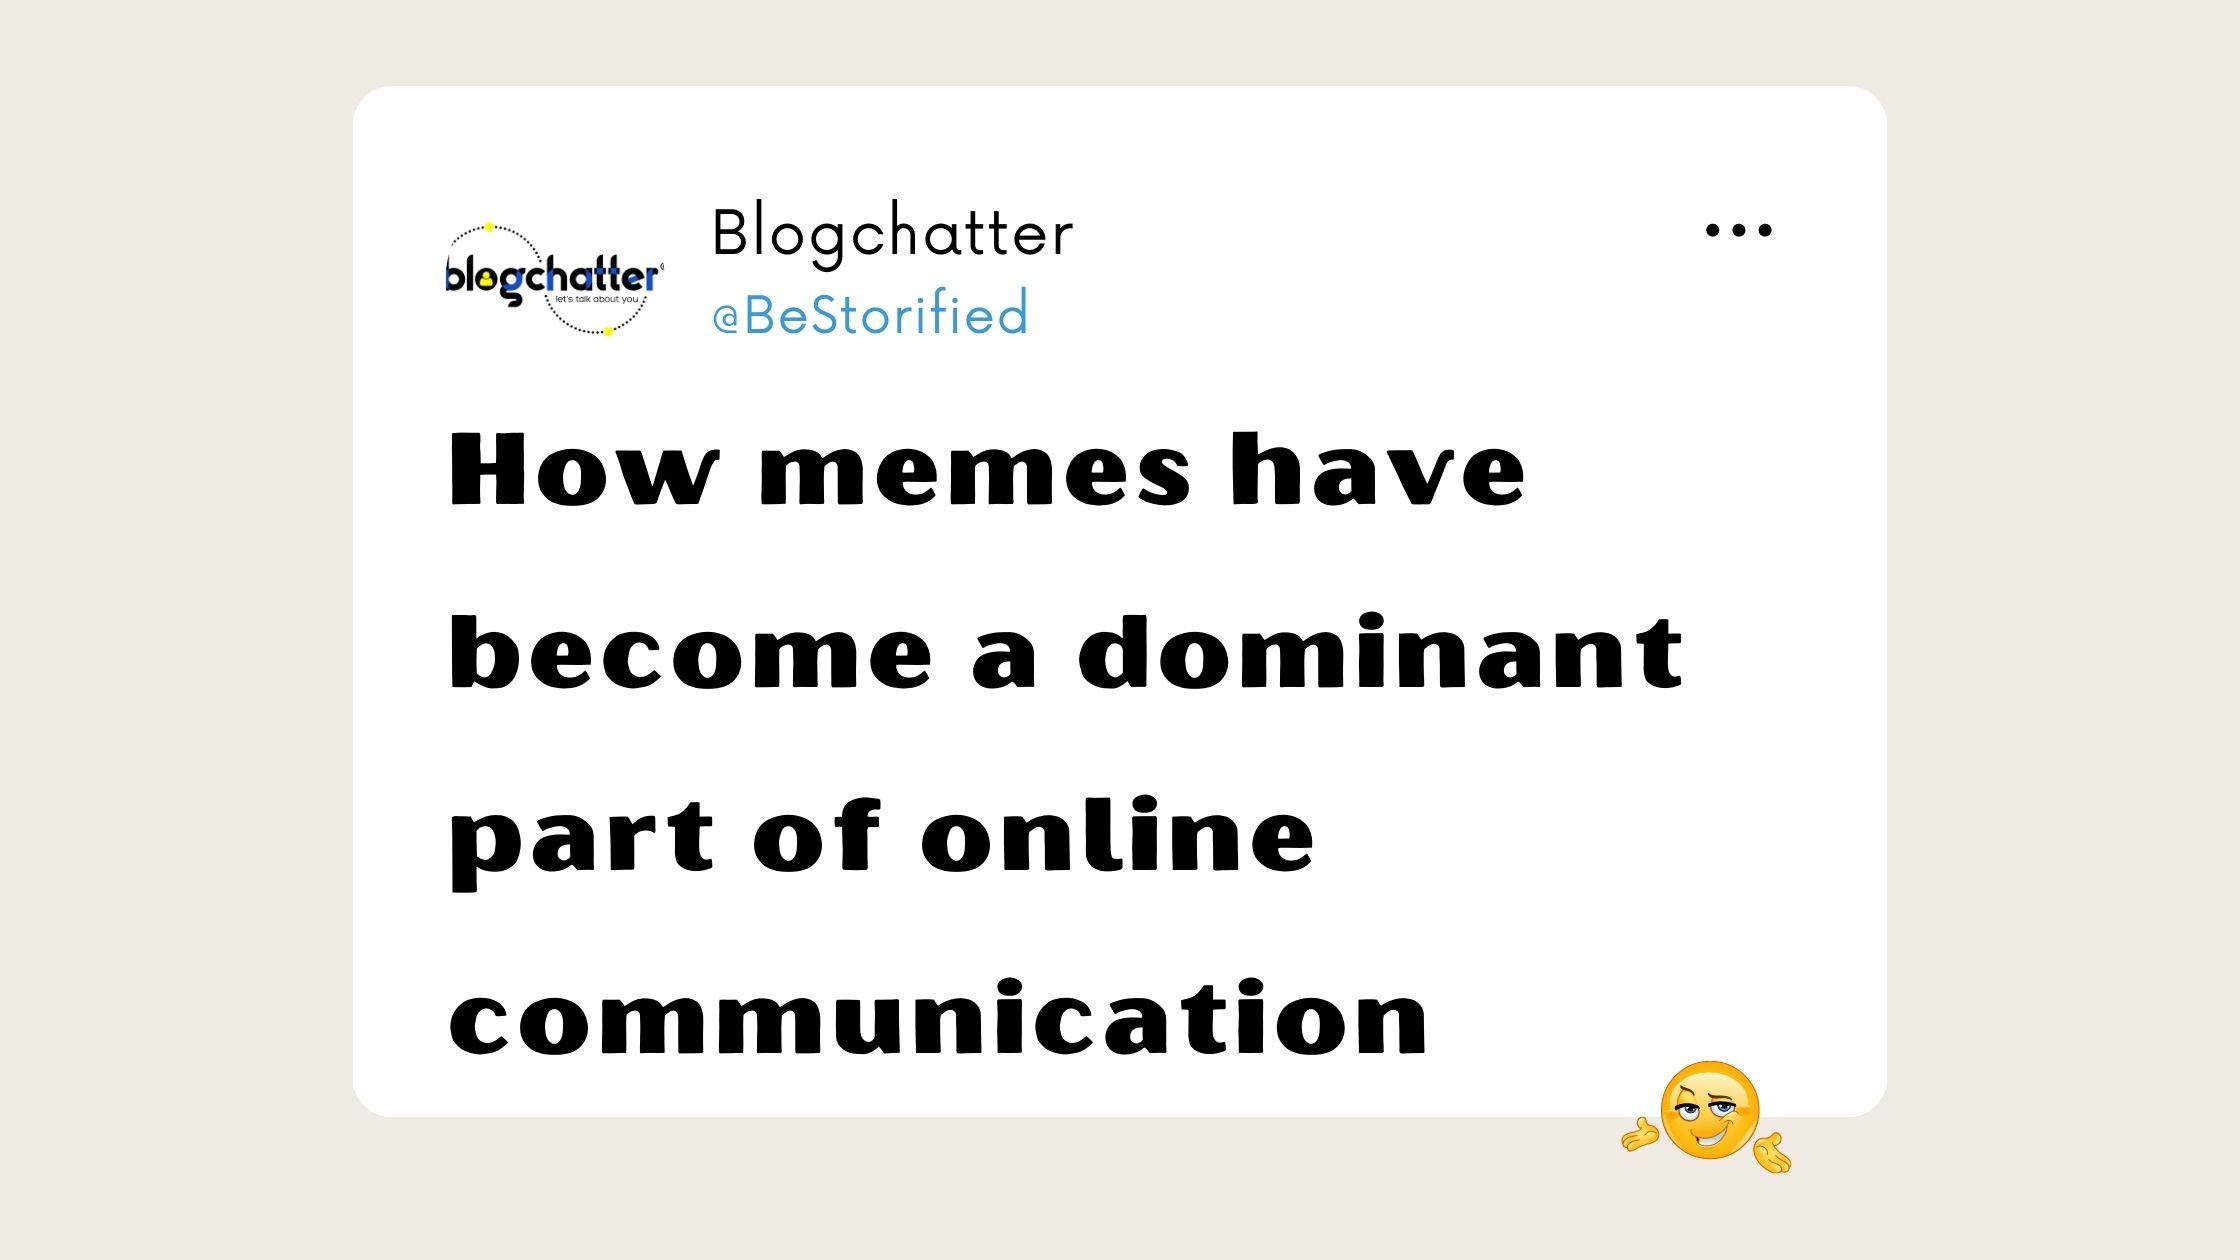 How memes have become a dominant part of online communication?